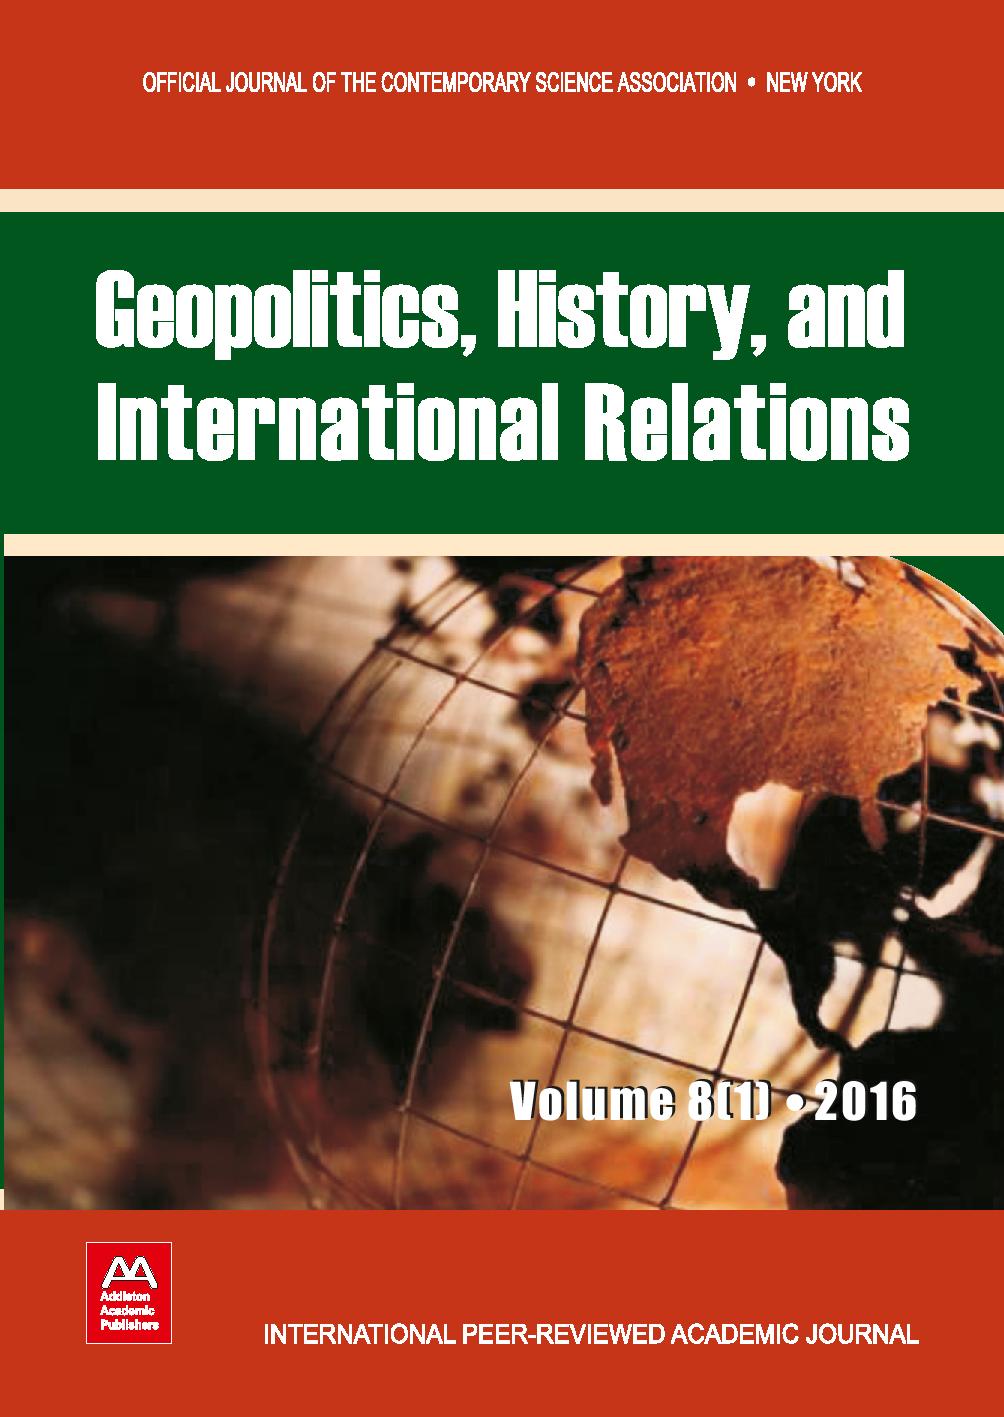 GEOPOLITICS, INSTITUTIONS, AND ECONOMICS:
ON THE RISE AND DECLINE OF CIVILIZATIONS Cover Image